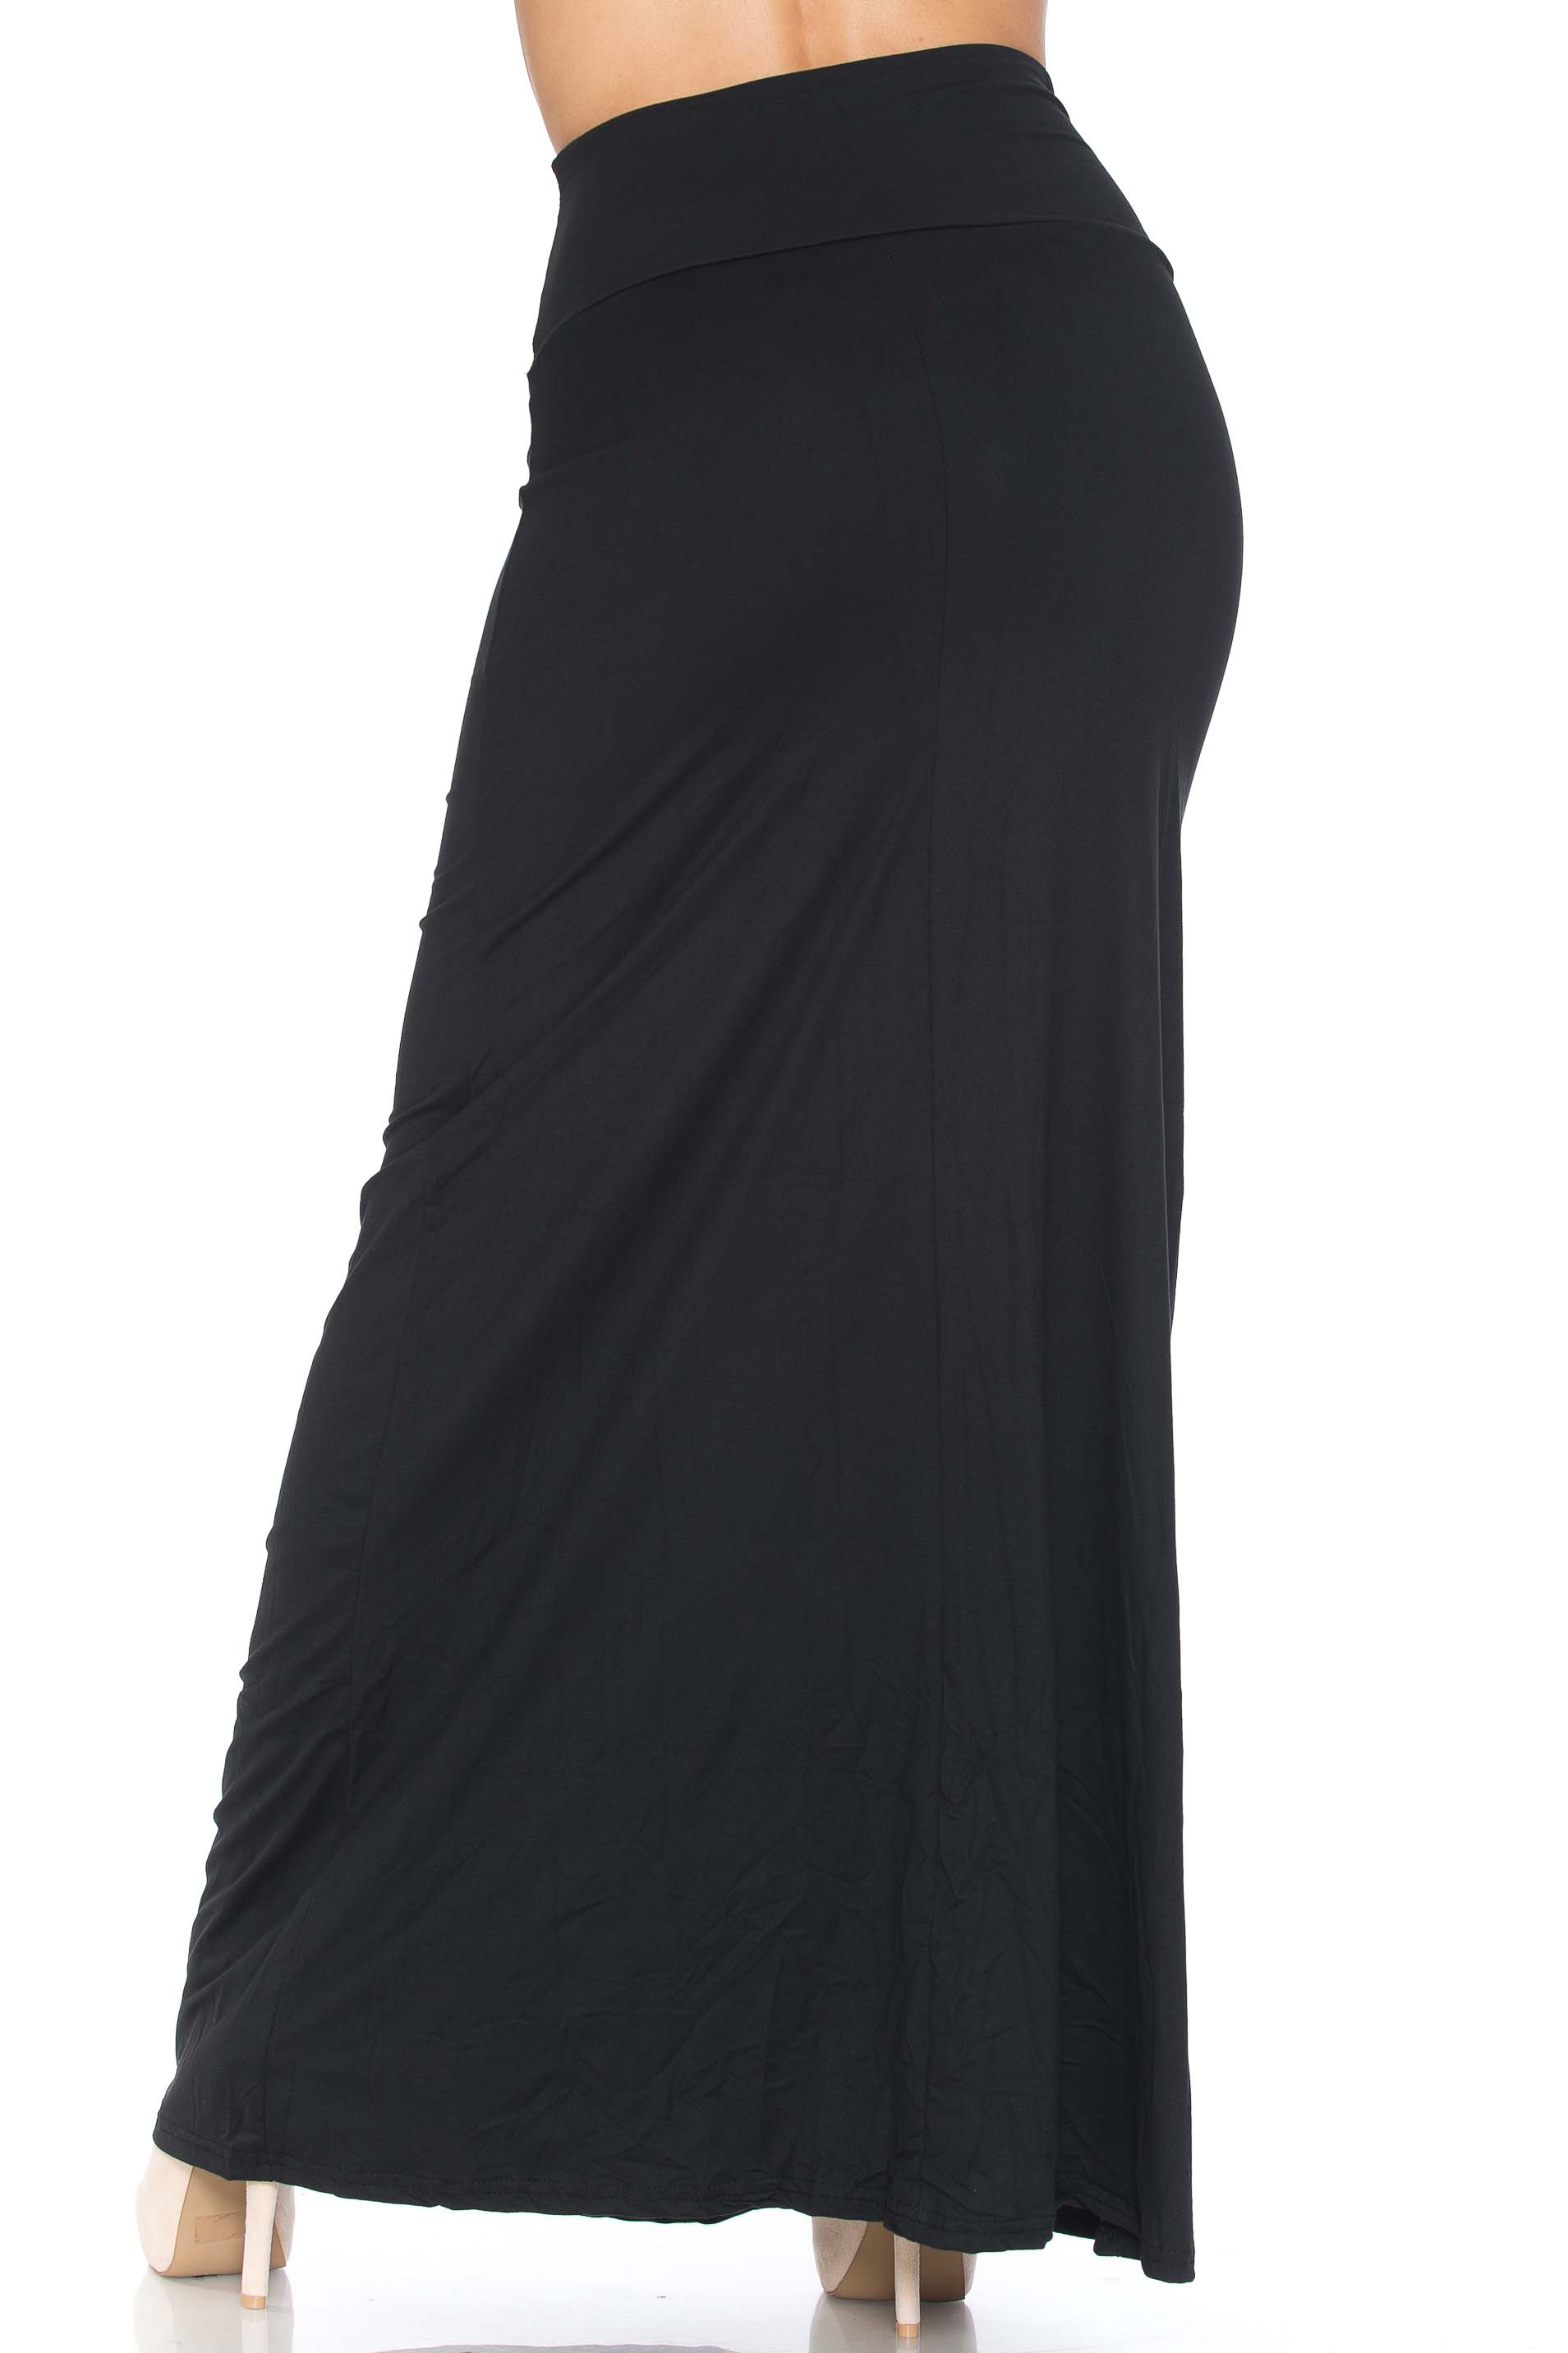 Wholesale Buttery Smooth Basic Black Plus Size Maxi Skirt